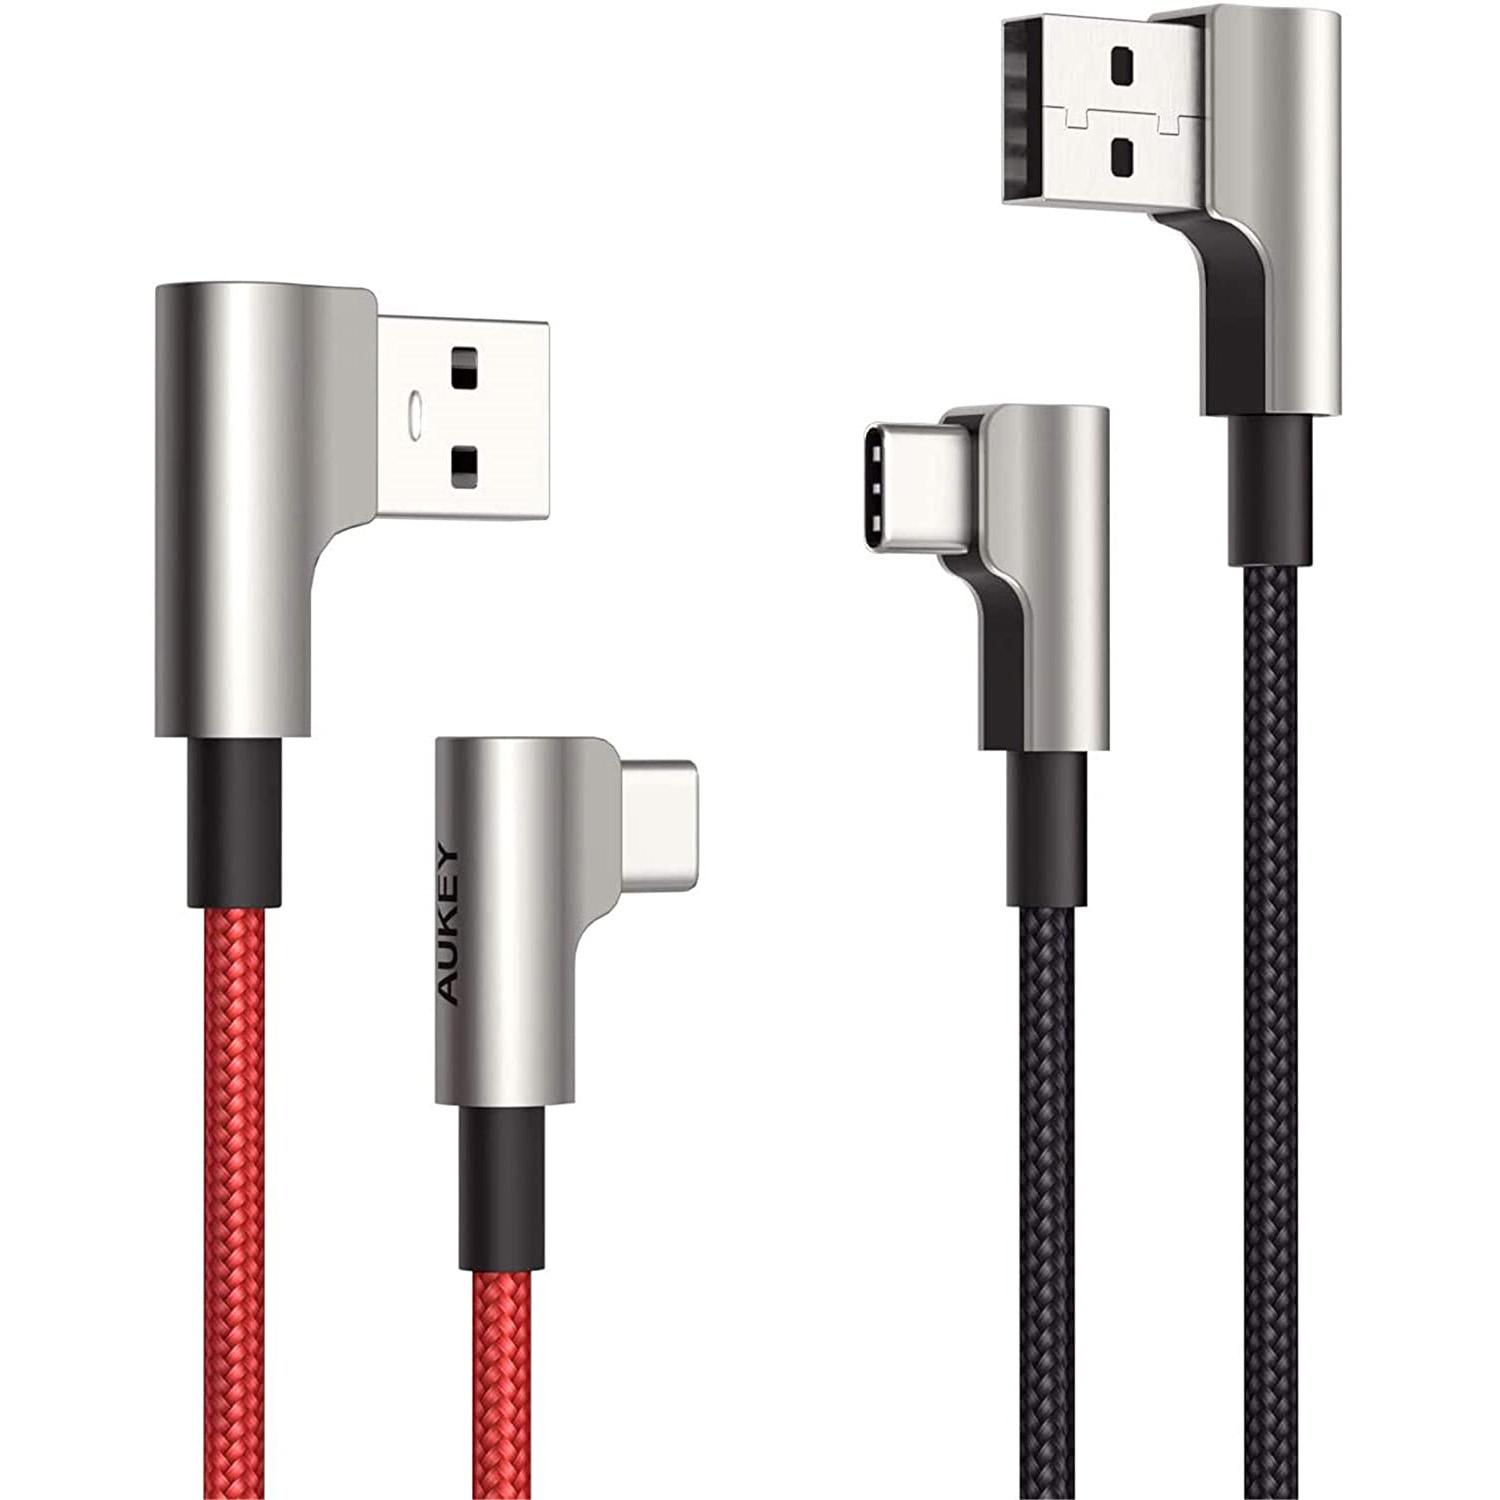 2 Aukey USB C to USB A 90 Degree Right Angle Nylon Braided Cables for $7.79